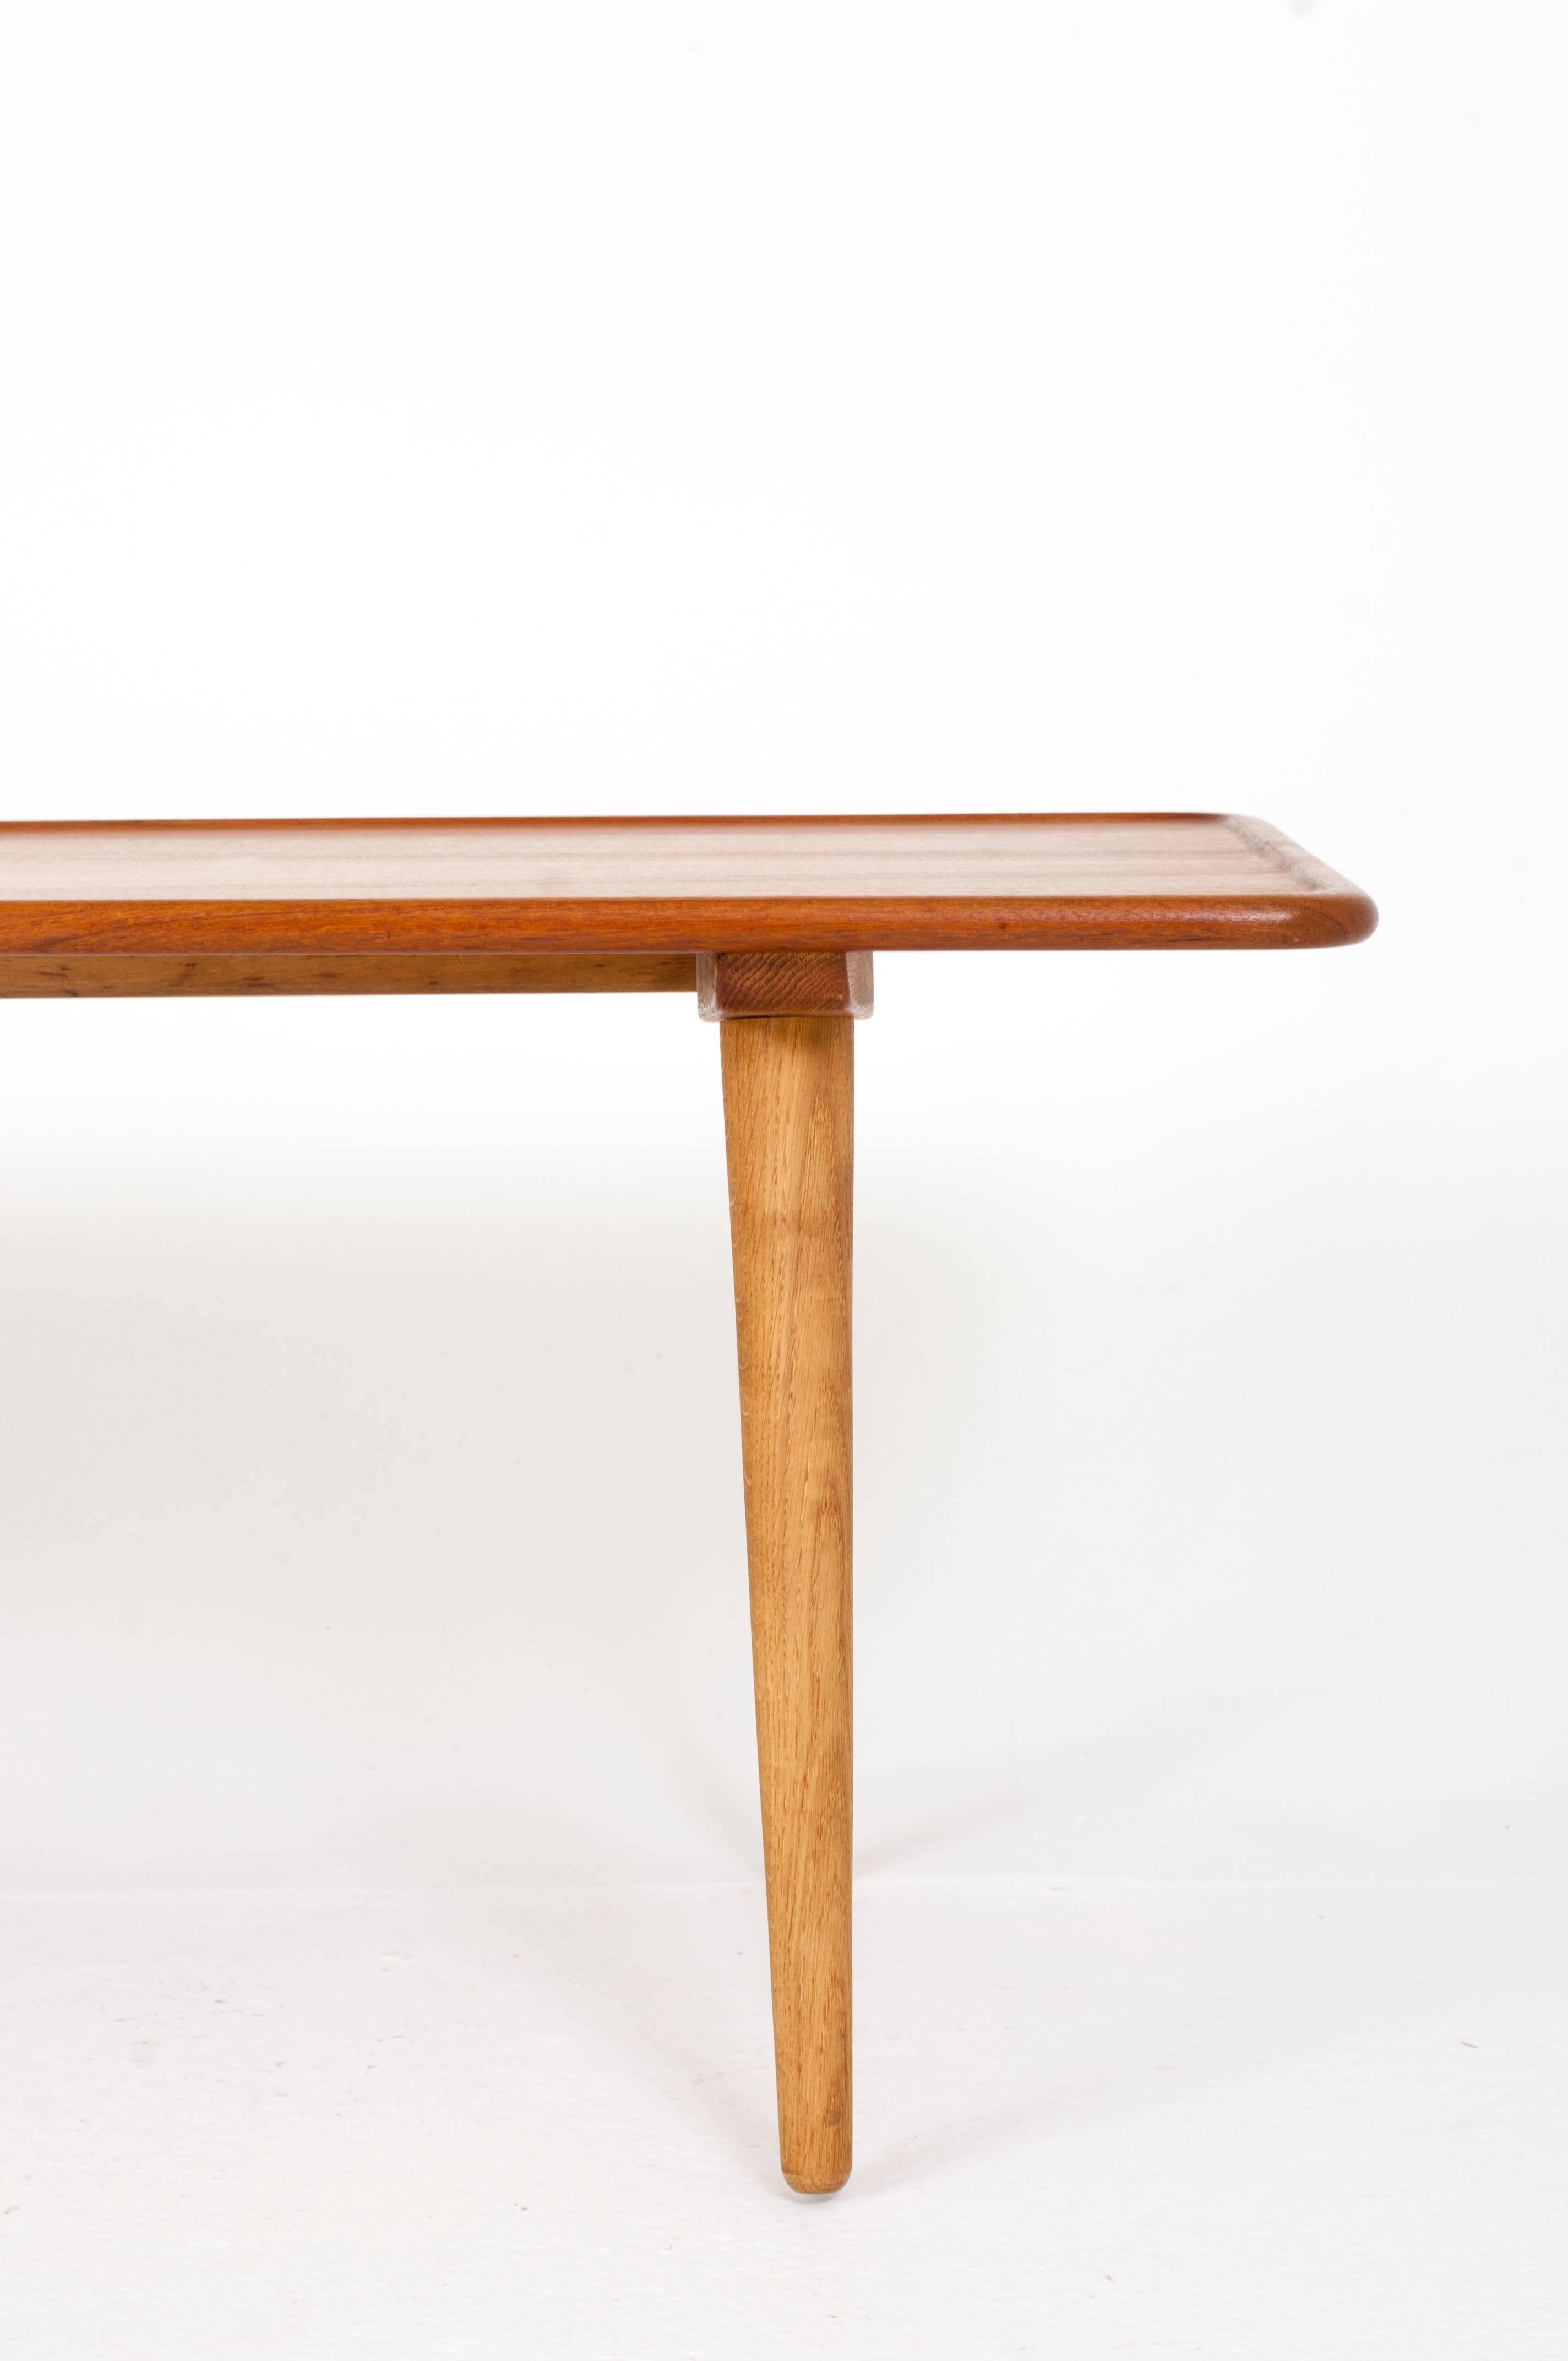 Hans J. Wegner

Rectangular solid teak and oak coffee table with angled legs, top with raised edge. 

Manufactured by Andreas Tuck, Odense. 

Designed ca 1955